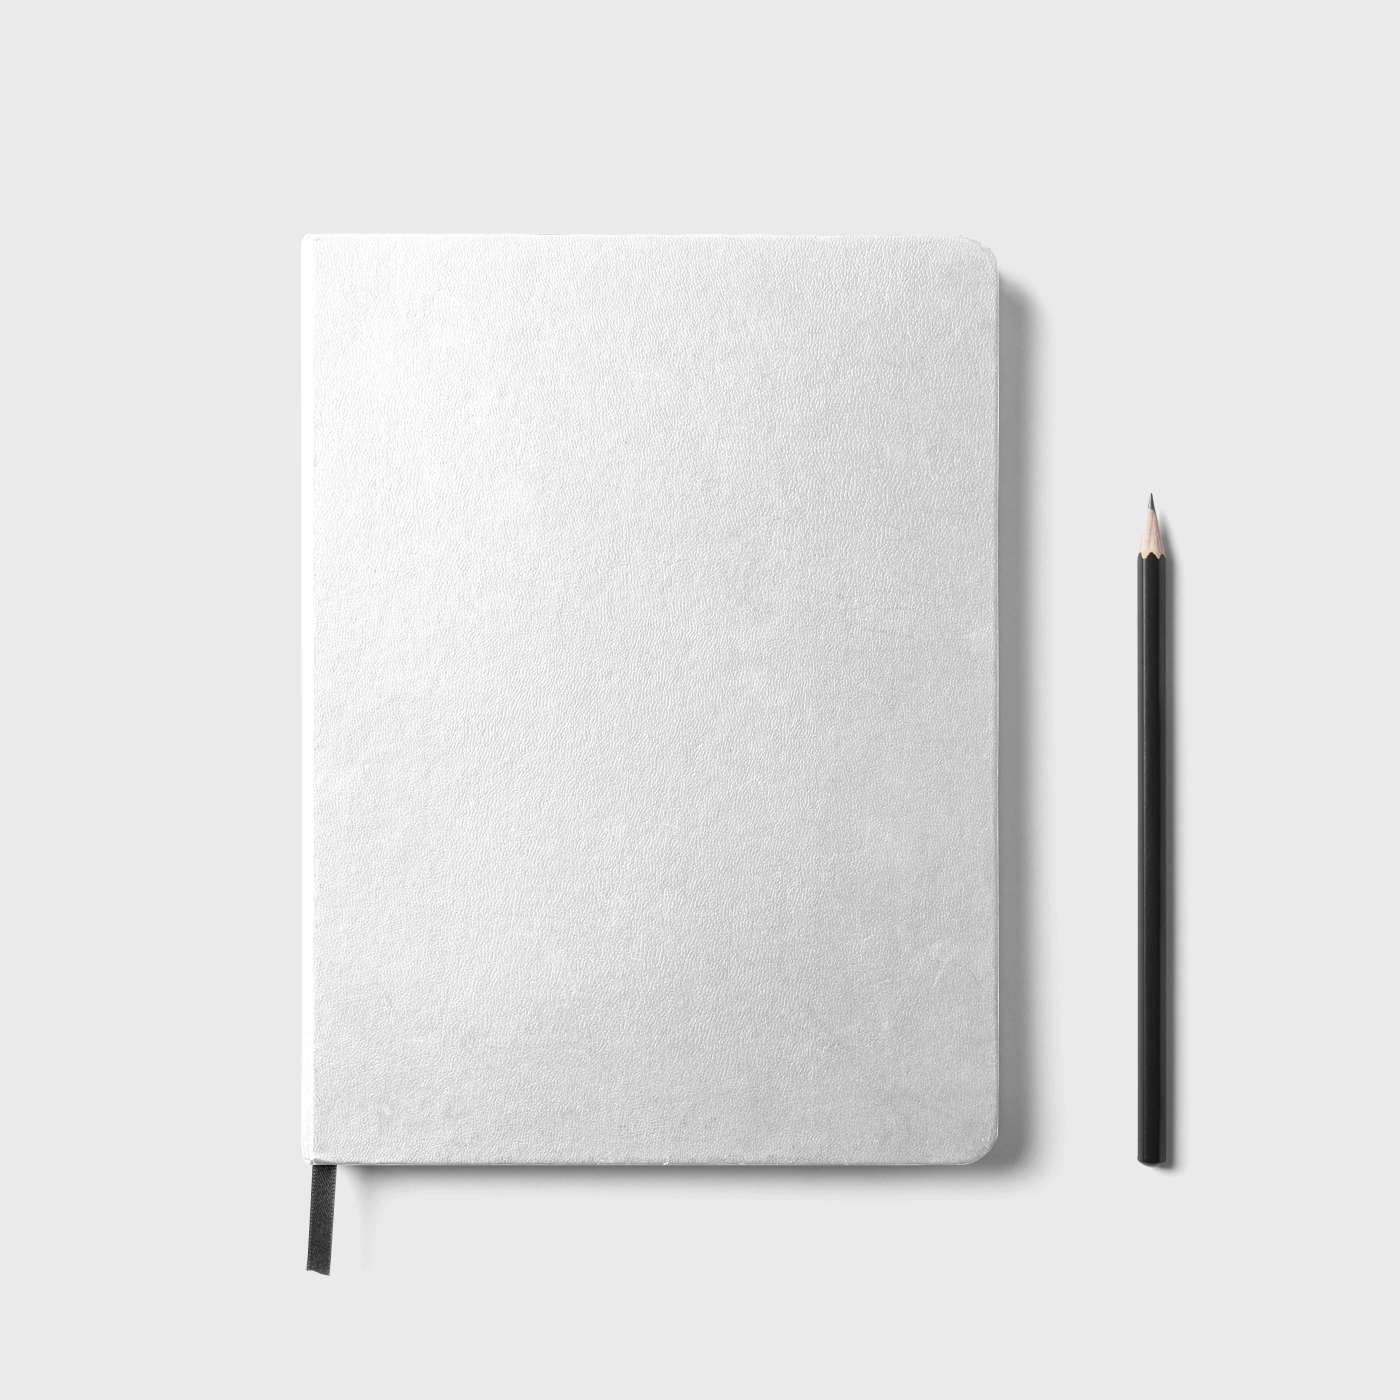 Top View of Realistic A4 Notebook Mockup FREE PSD